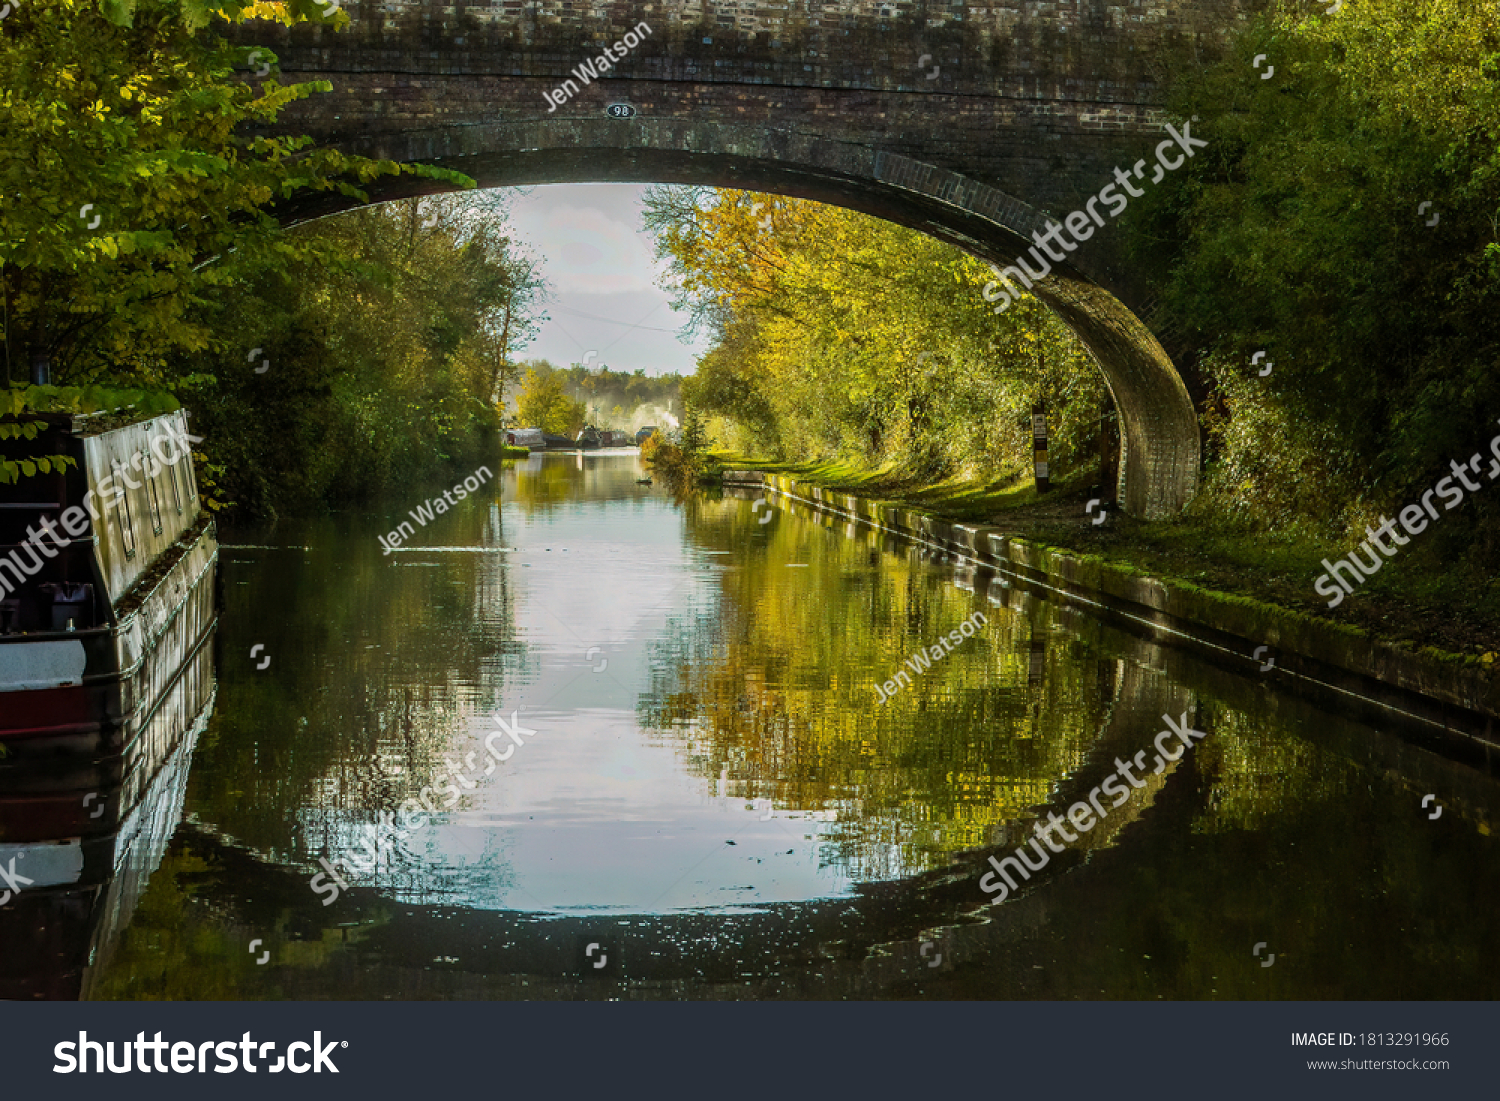 Autumn reflections of Wolfhamcote Bridge No 98, narrowboats, autumn leaves, colors, Oxford Canal near Wolverton, England.  Peaceful autumn light. Picturesque, scenic. Canal life.  Destination holiday. #1813291966